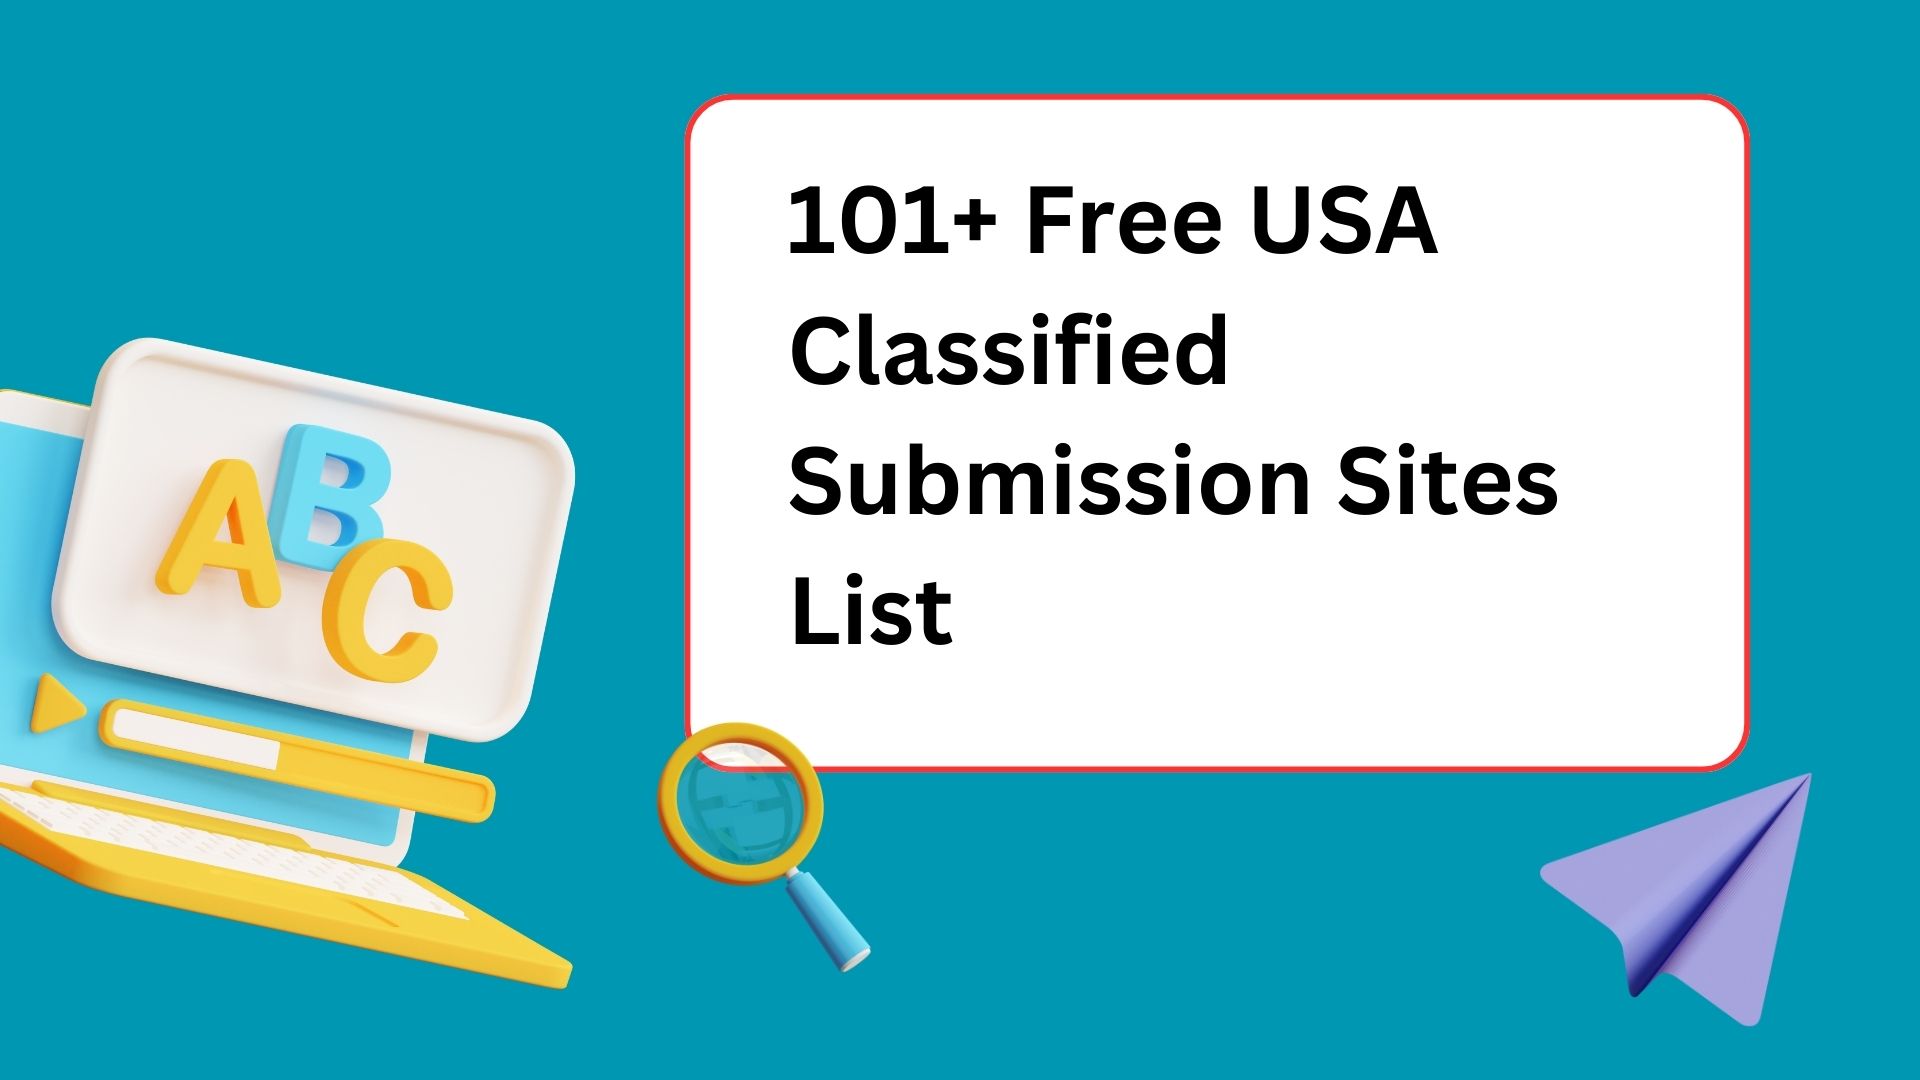 101+ Free USA Classified Submission Sites List